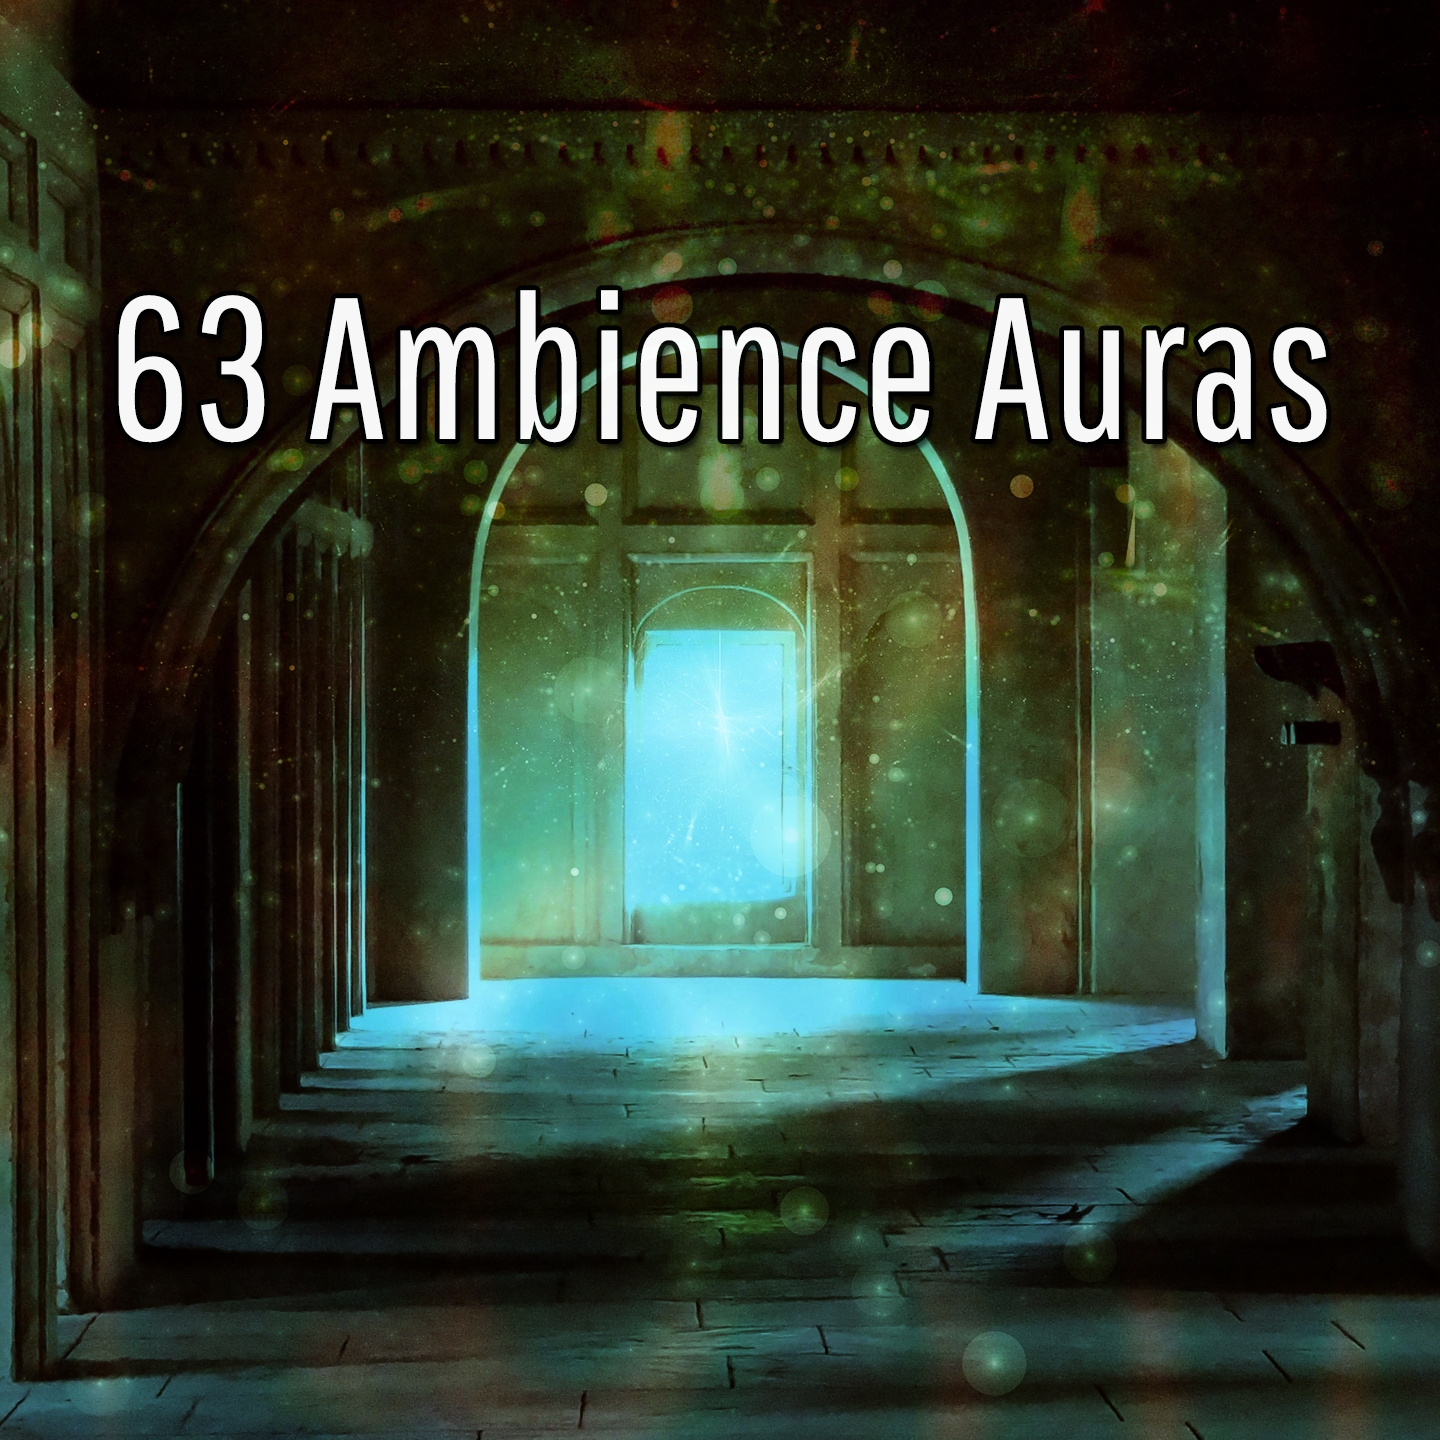 63 Ambience Auras